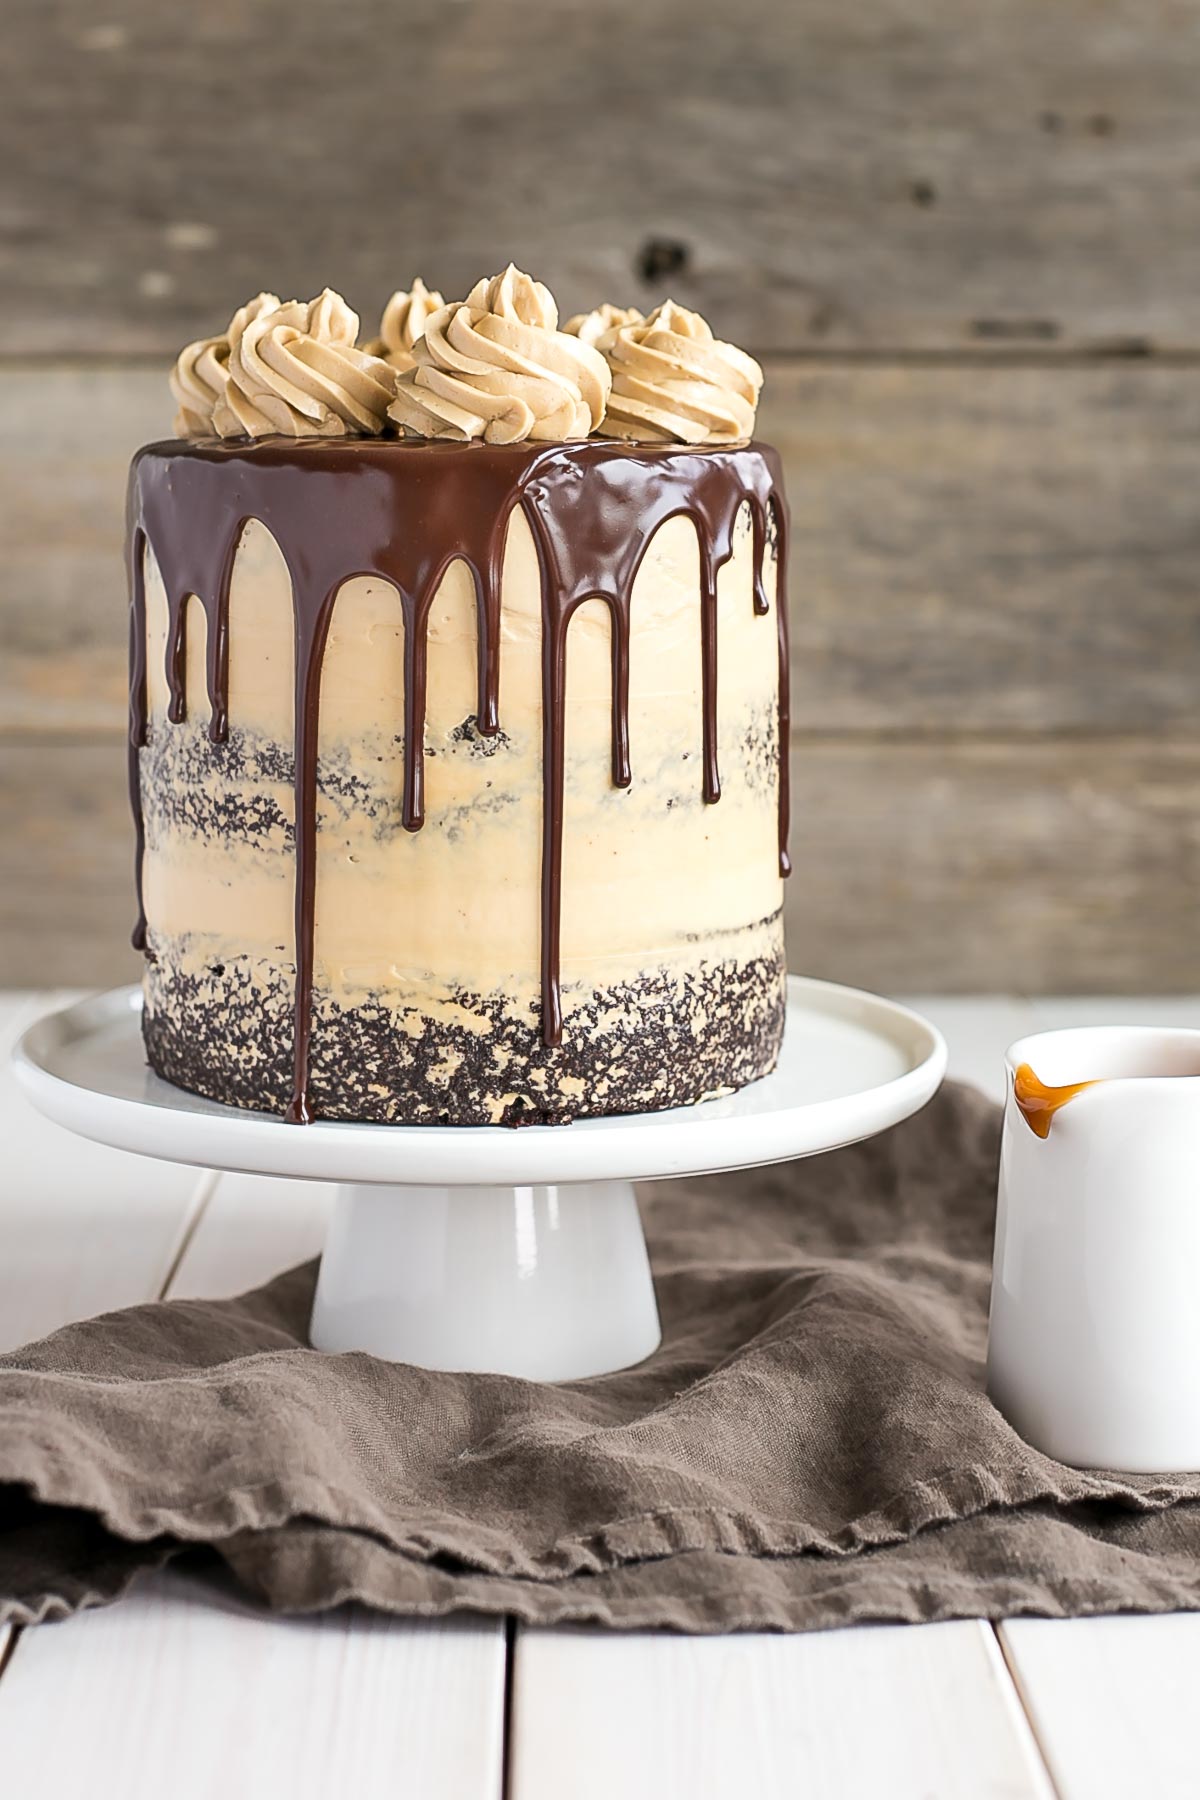 16 Drip Cake Recipes You Can DIY... Thanks To Pinterest! | Stay At Home Mum